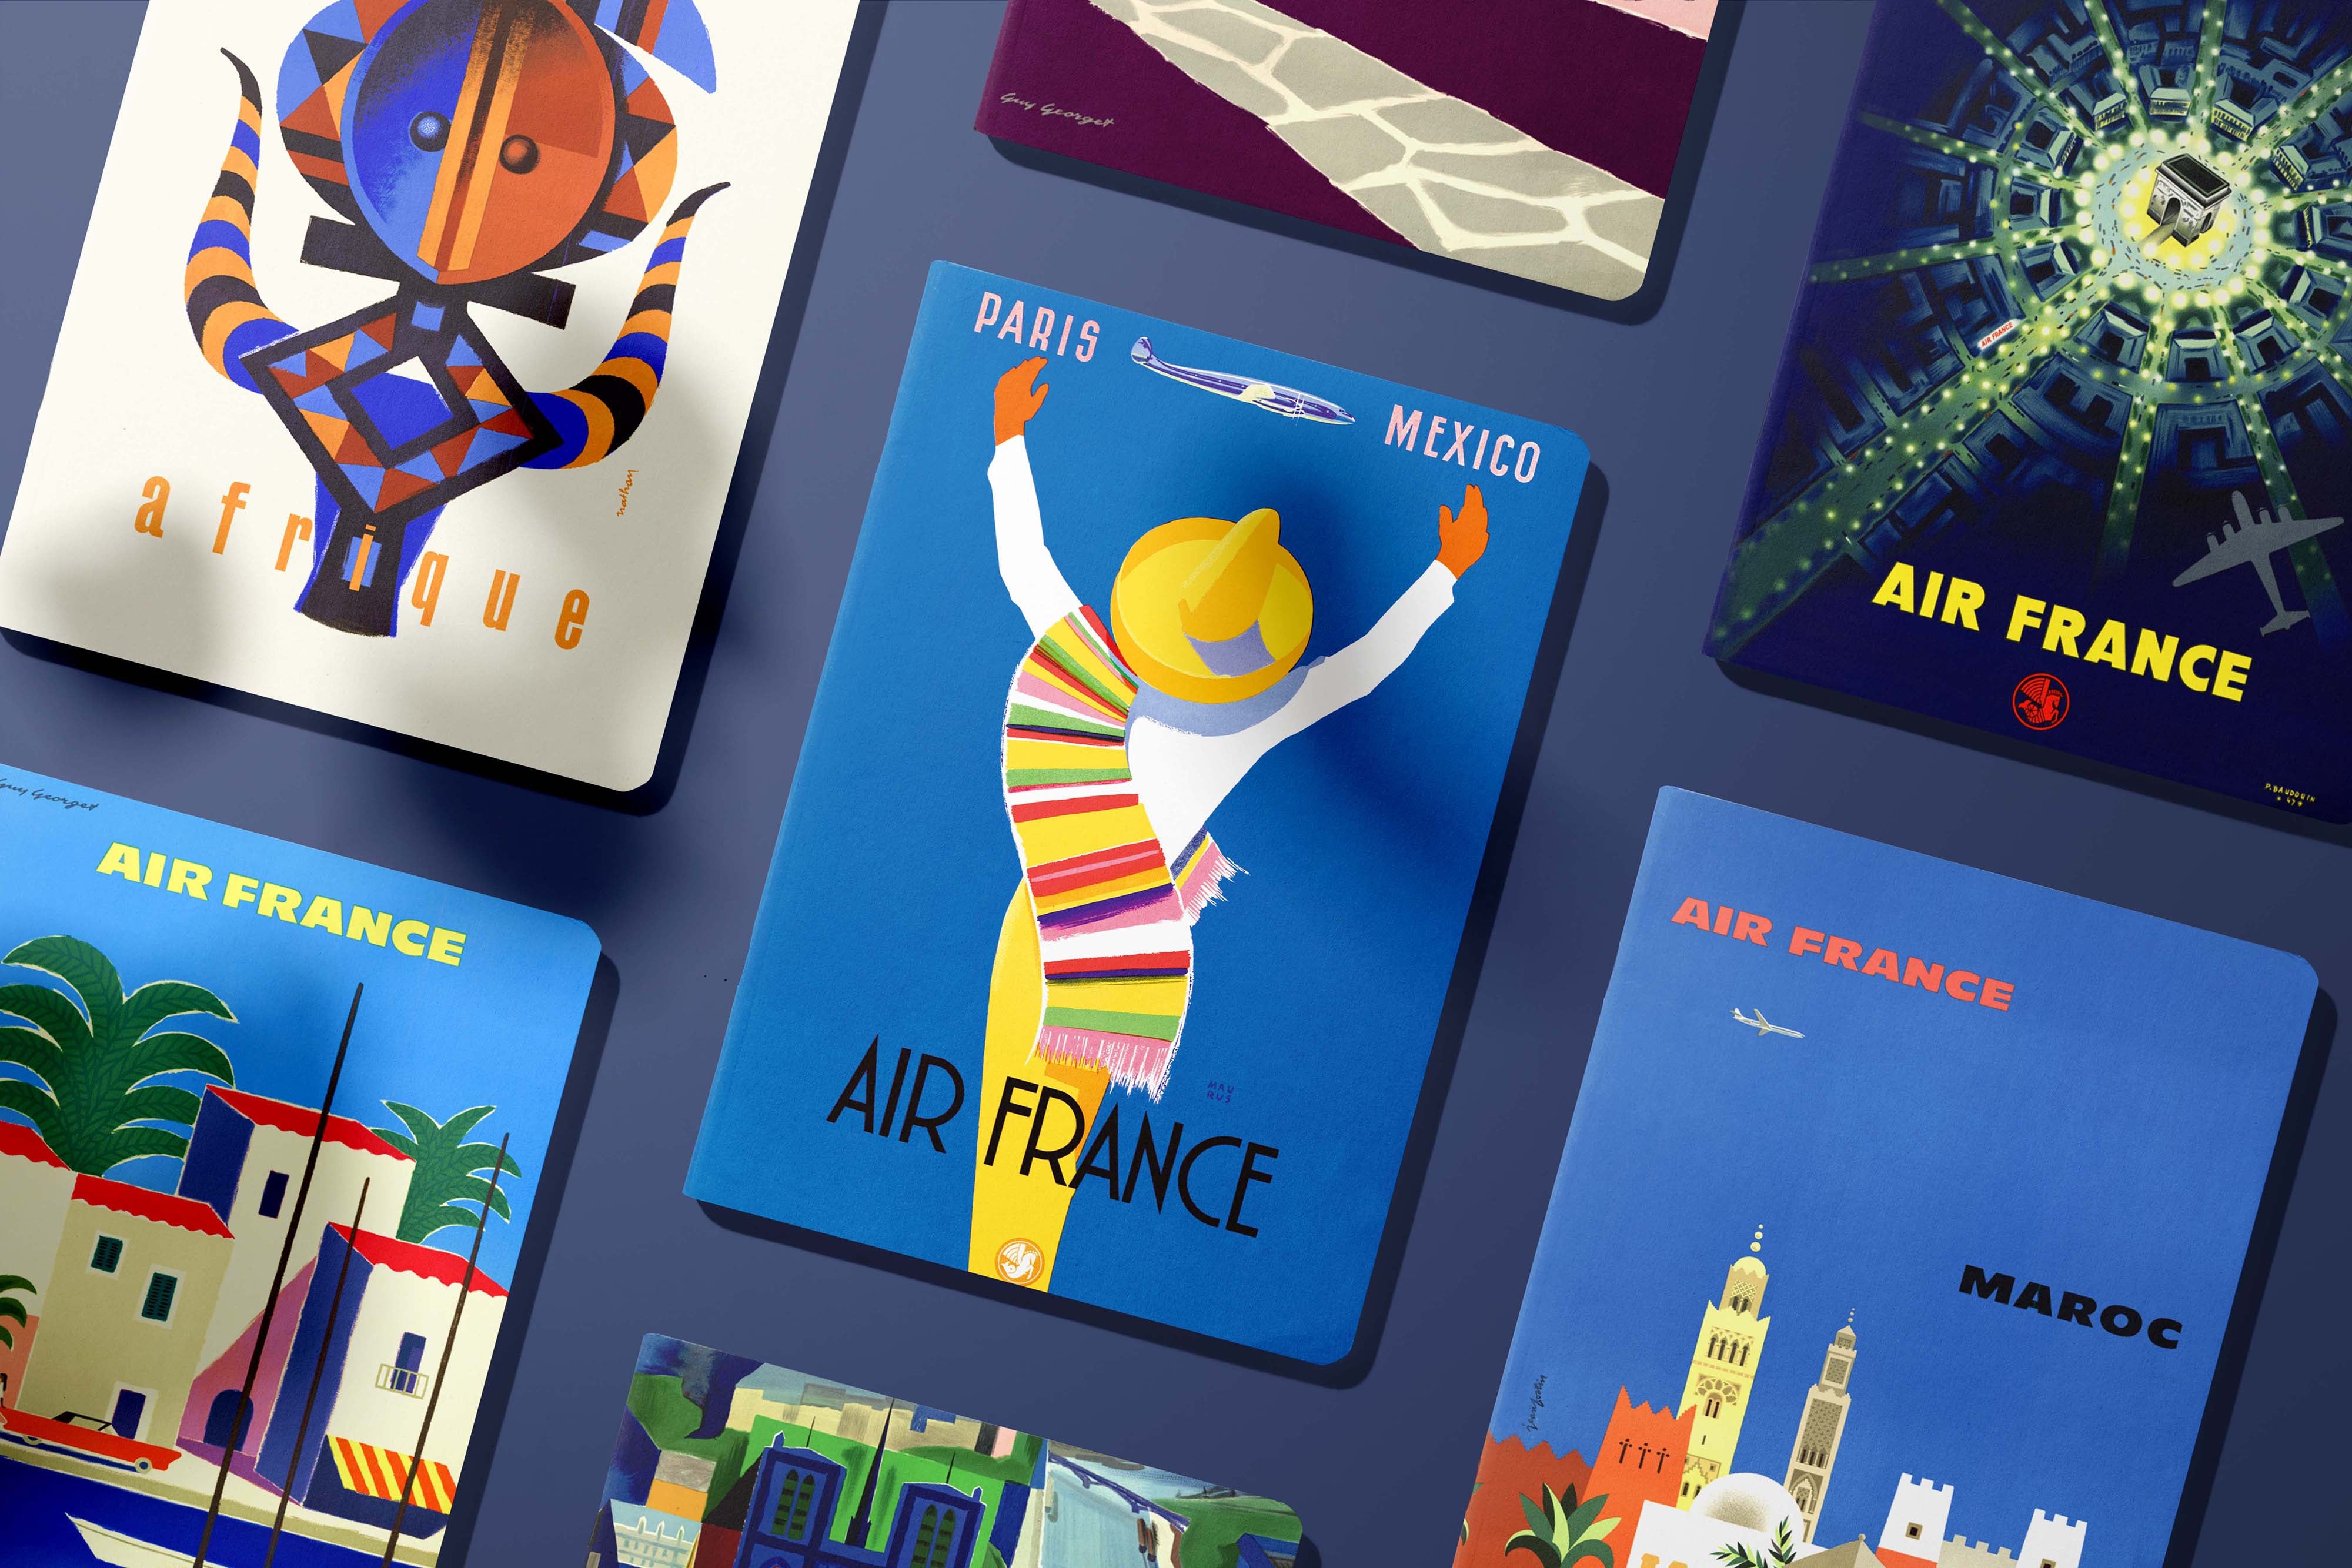 Air France booklets